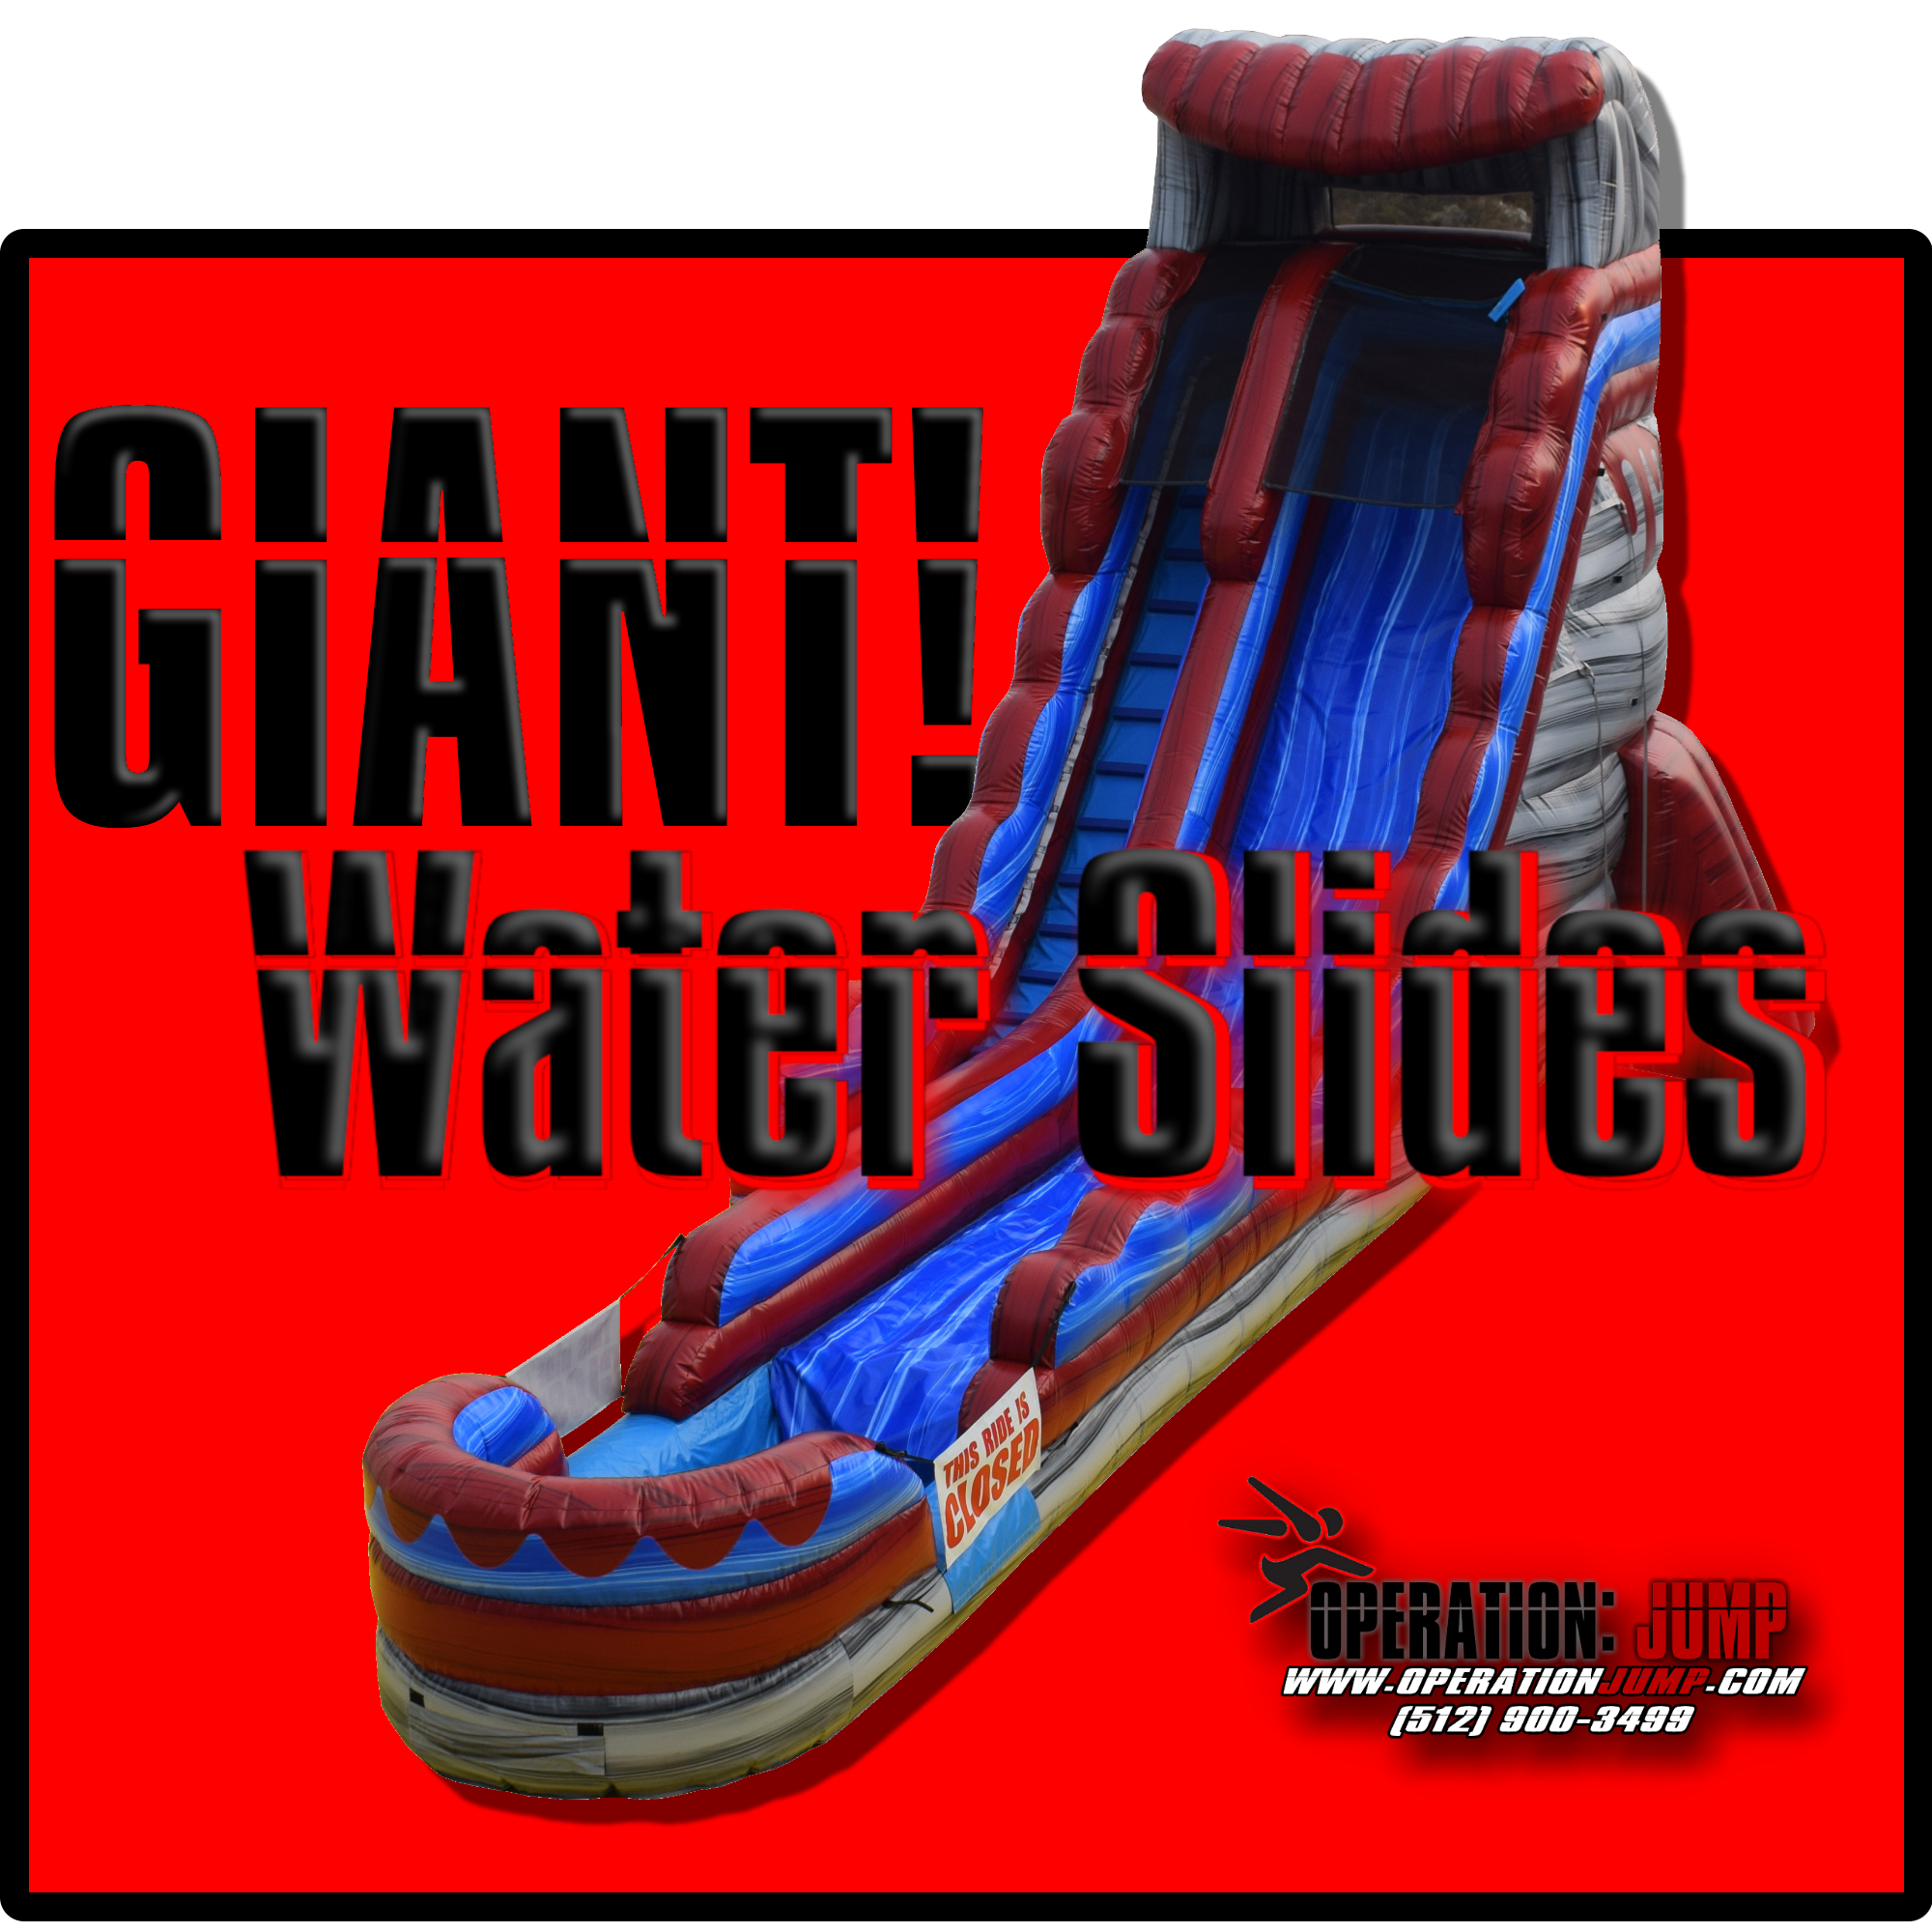 Giant Inflatable Water Slides 